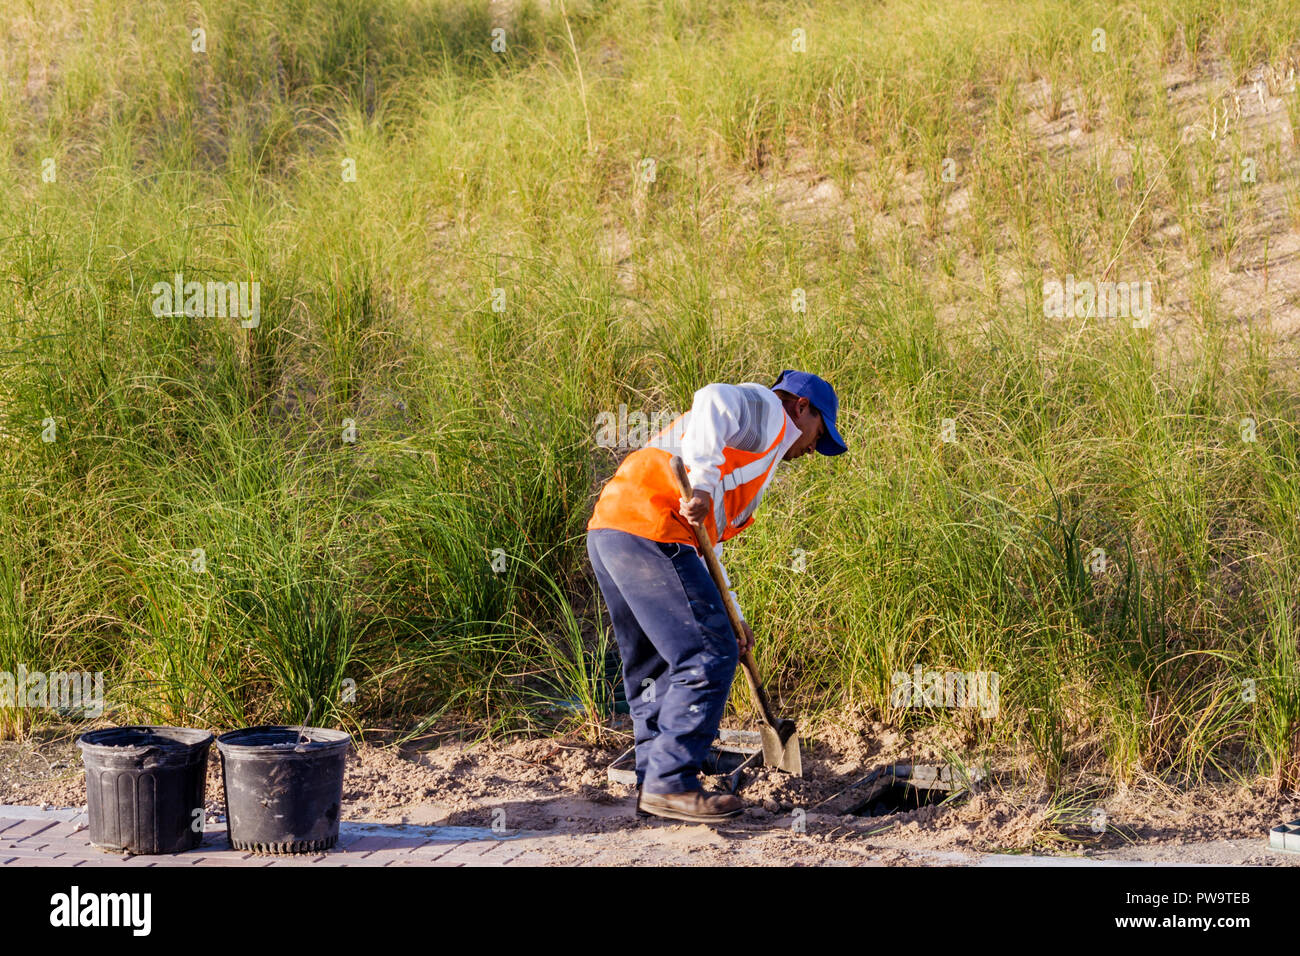 Miami Beach Florida,South Pointe Park,Point,sand,public,beach,dune,grass,Hispanic man men male adult adults,worker,workers,working,work,planting,shove Stock Photo